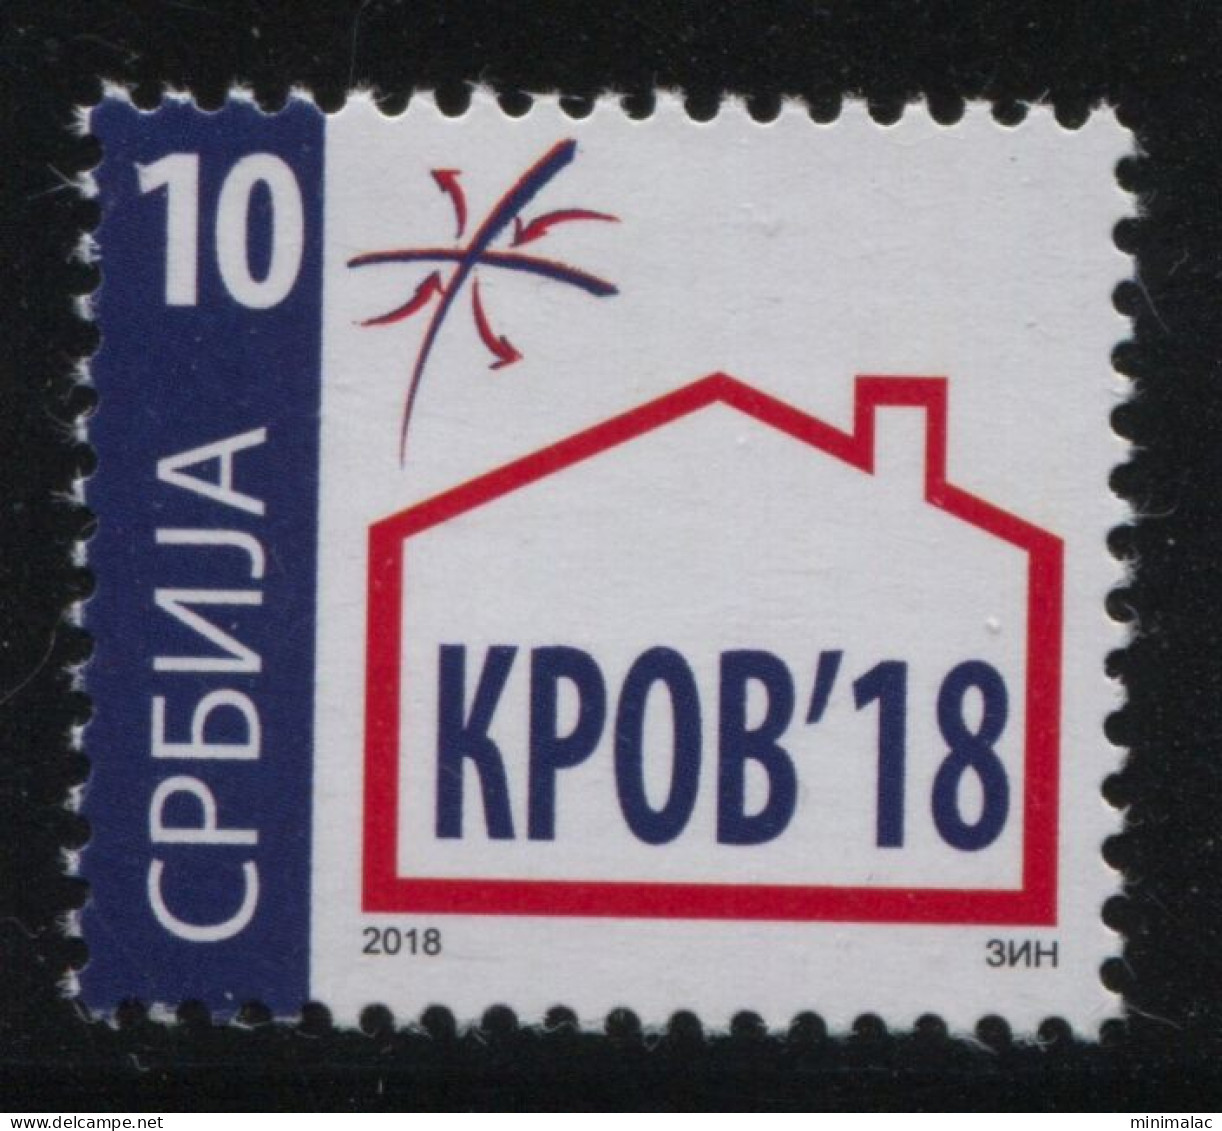 Serbia 2018, Roof For Refugees, Charity Stamp, Additional Stamp 10d, MNH - Servië